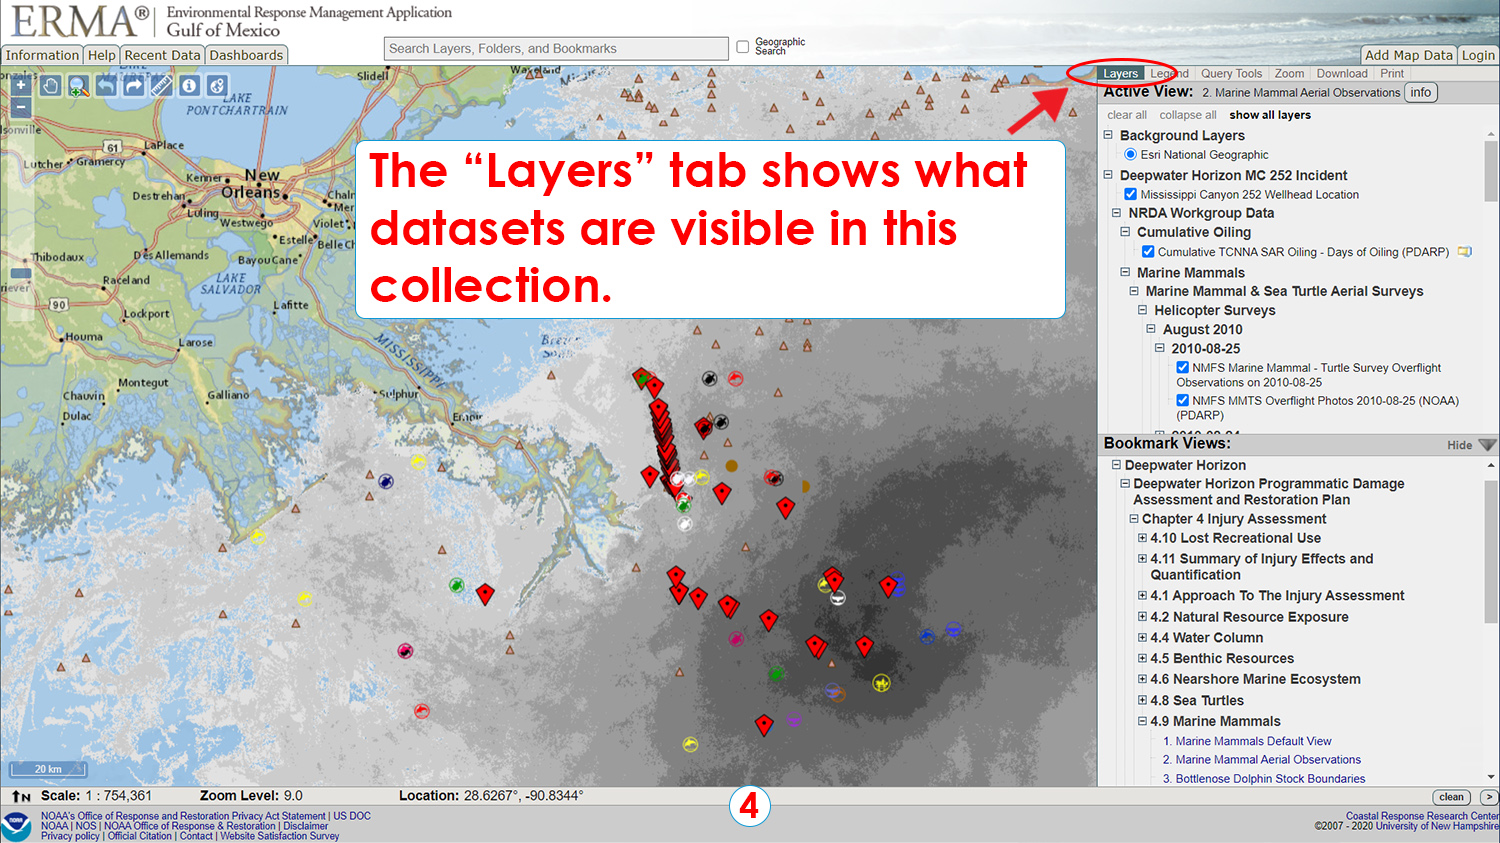 Step 4: The "Layers" tab shows what datasets are visible in this collection.